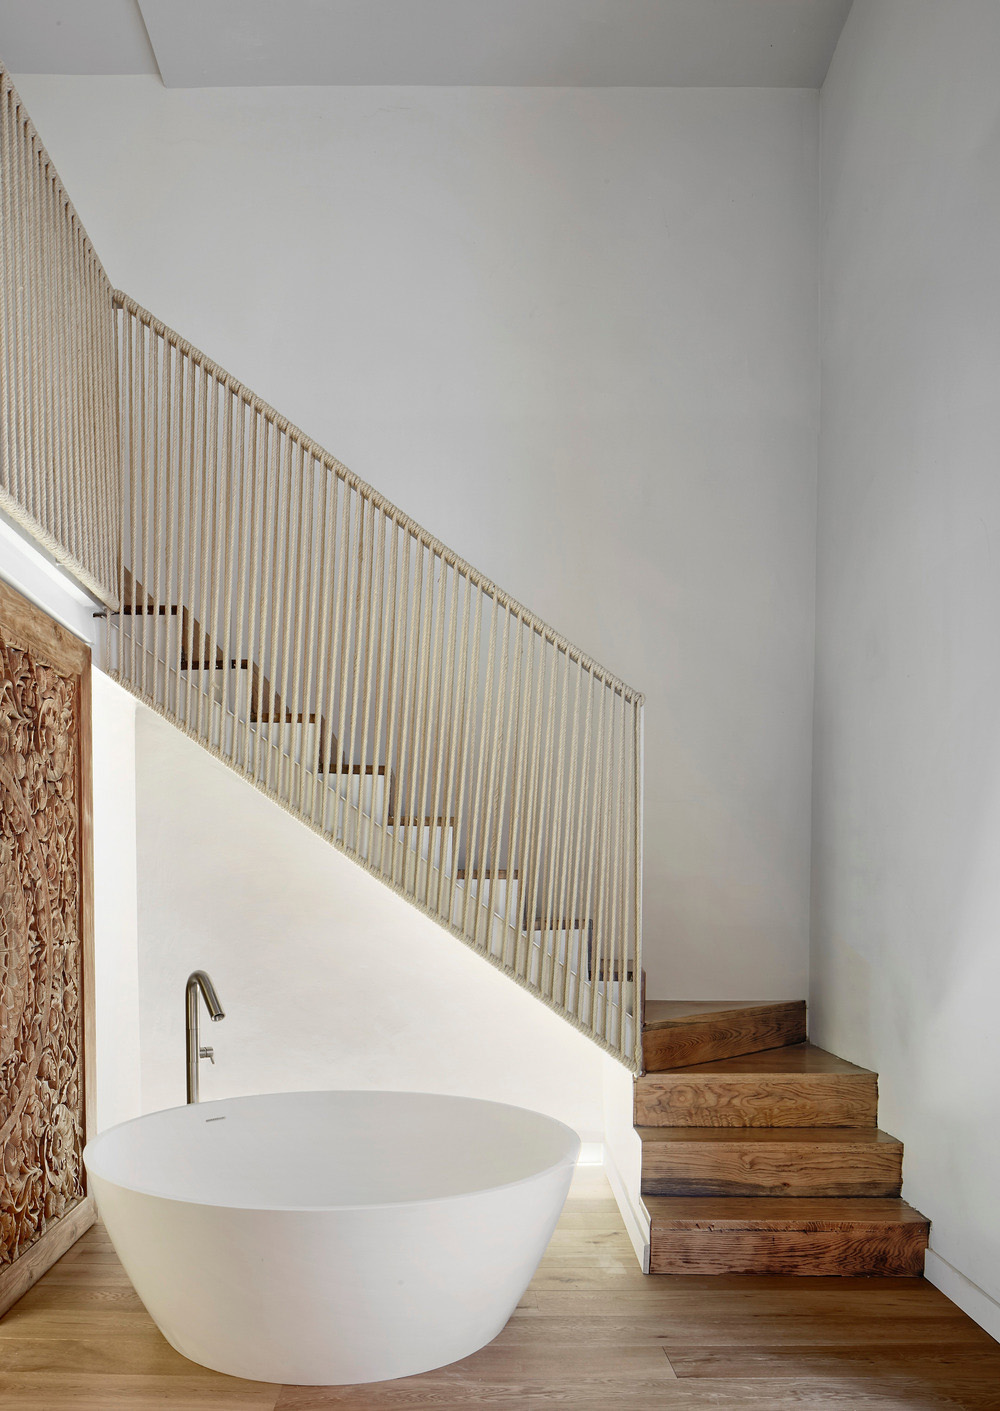 staircase of a loft with rope balustrade and circular tub